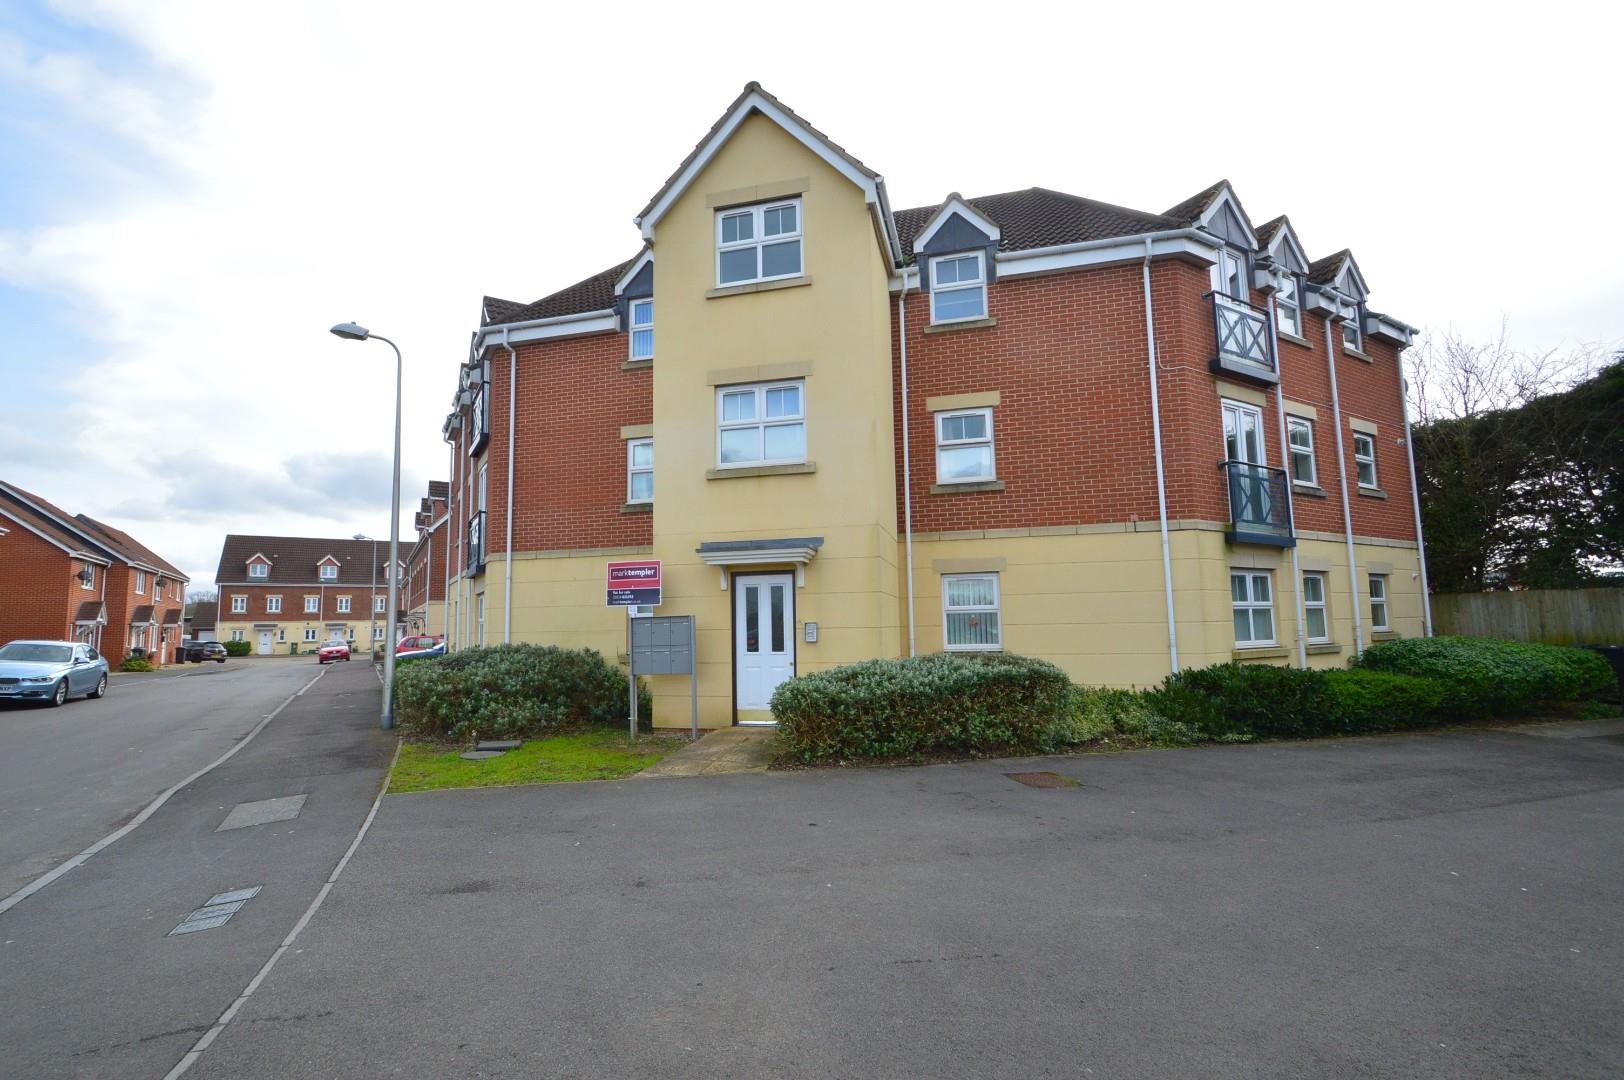 Modern, two bedroom ground floor apartment in the village of Yatton